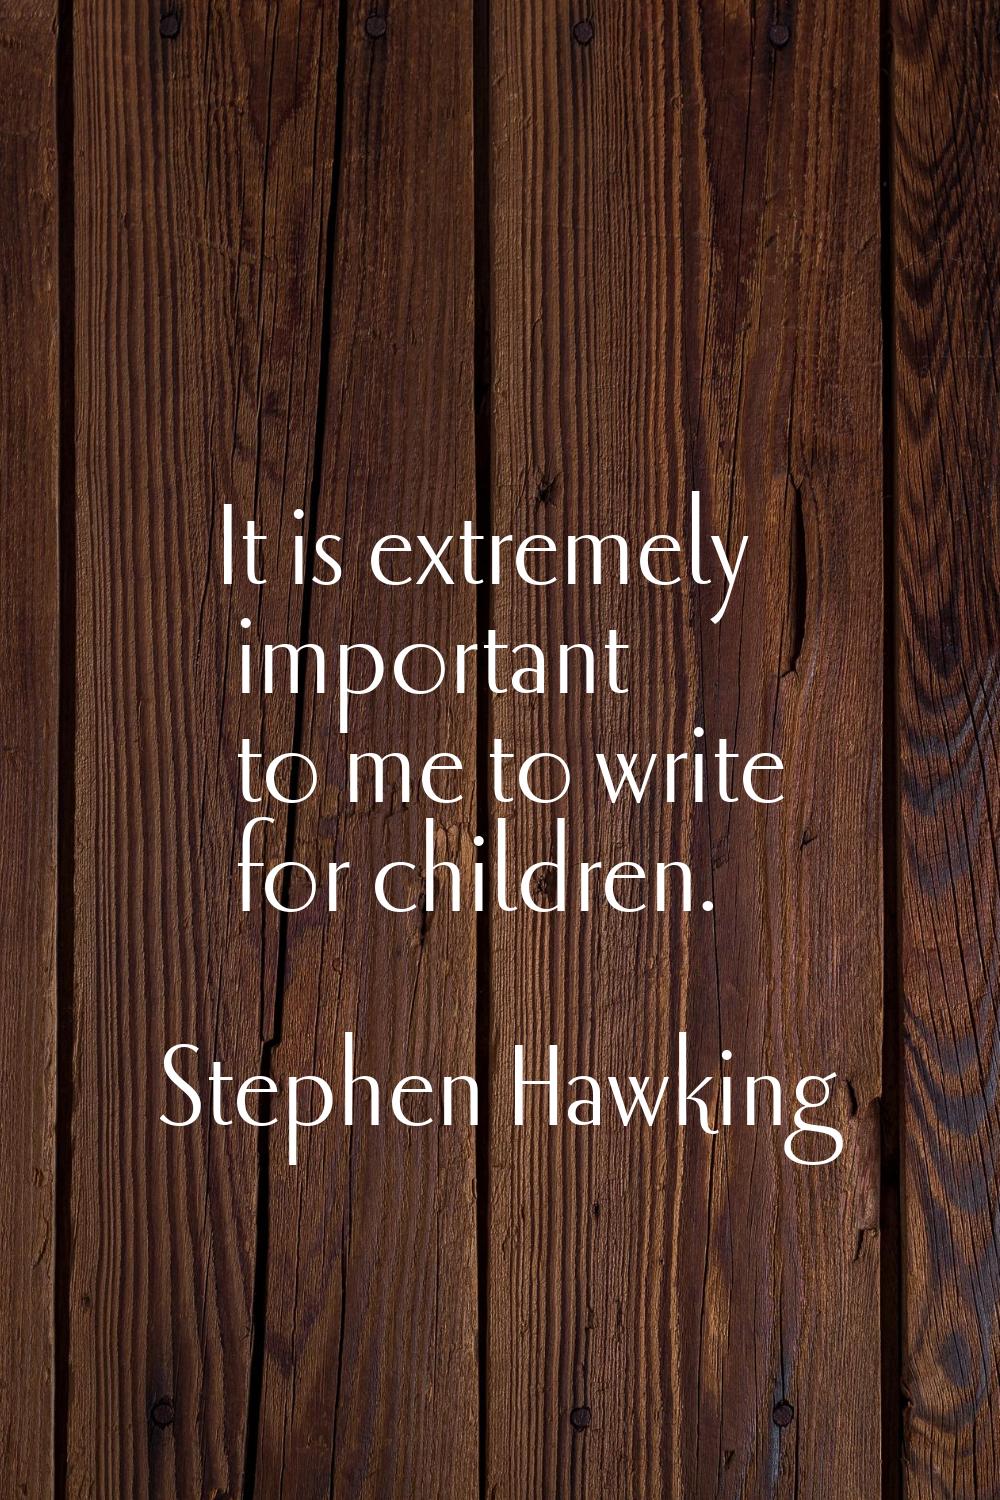 It is extremely important to me to write for children.